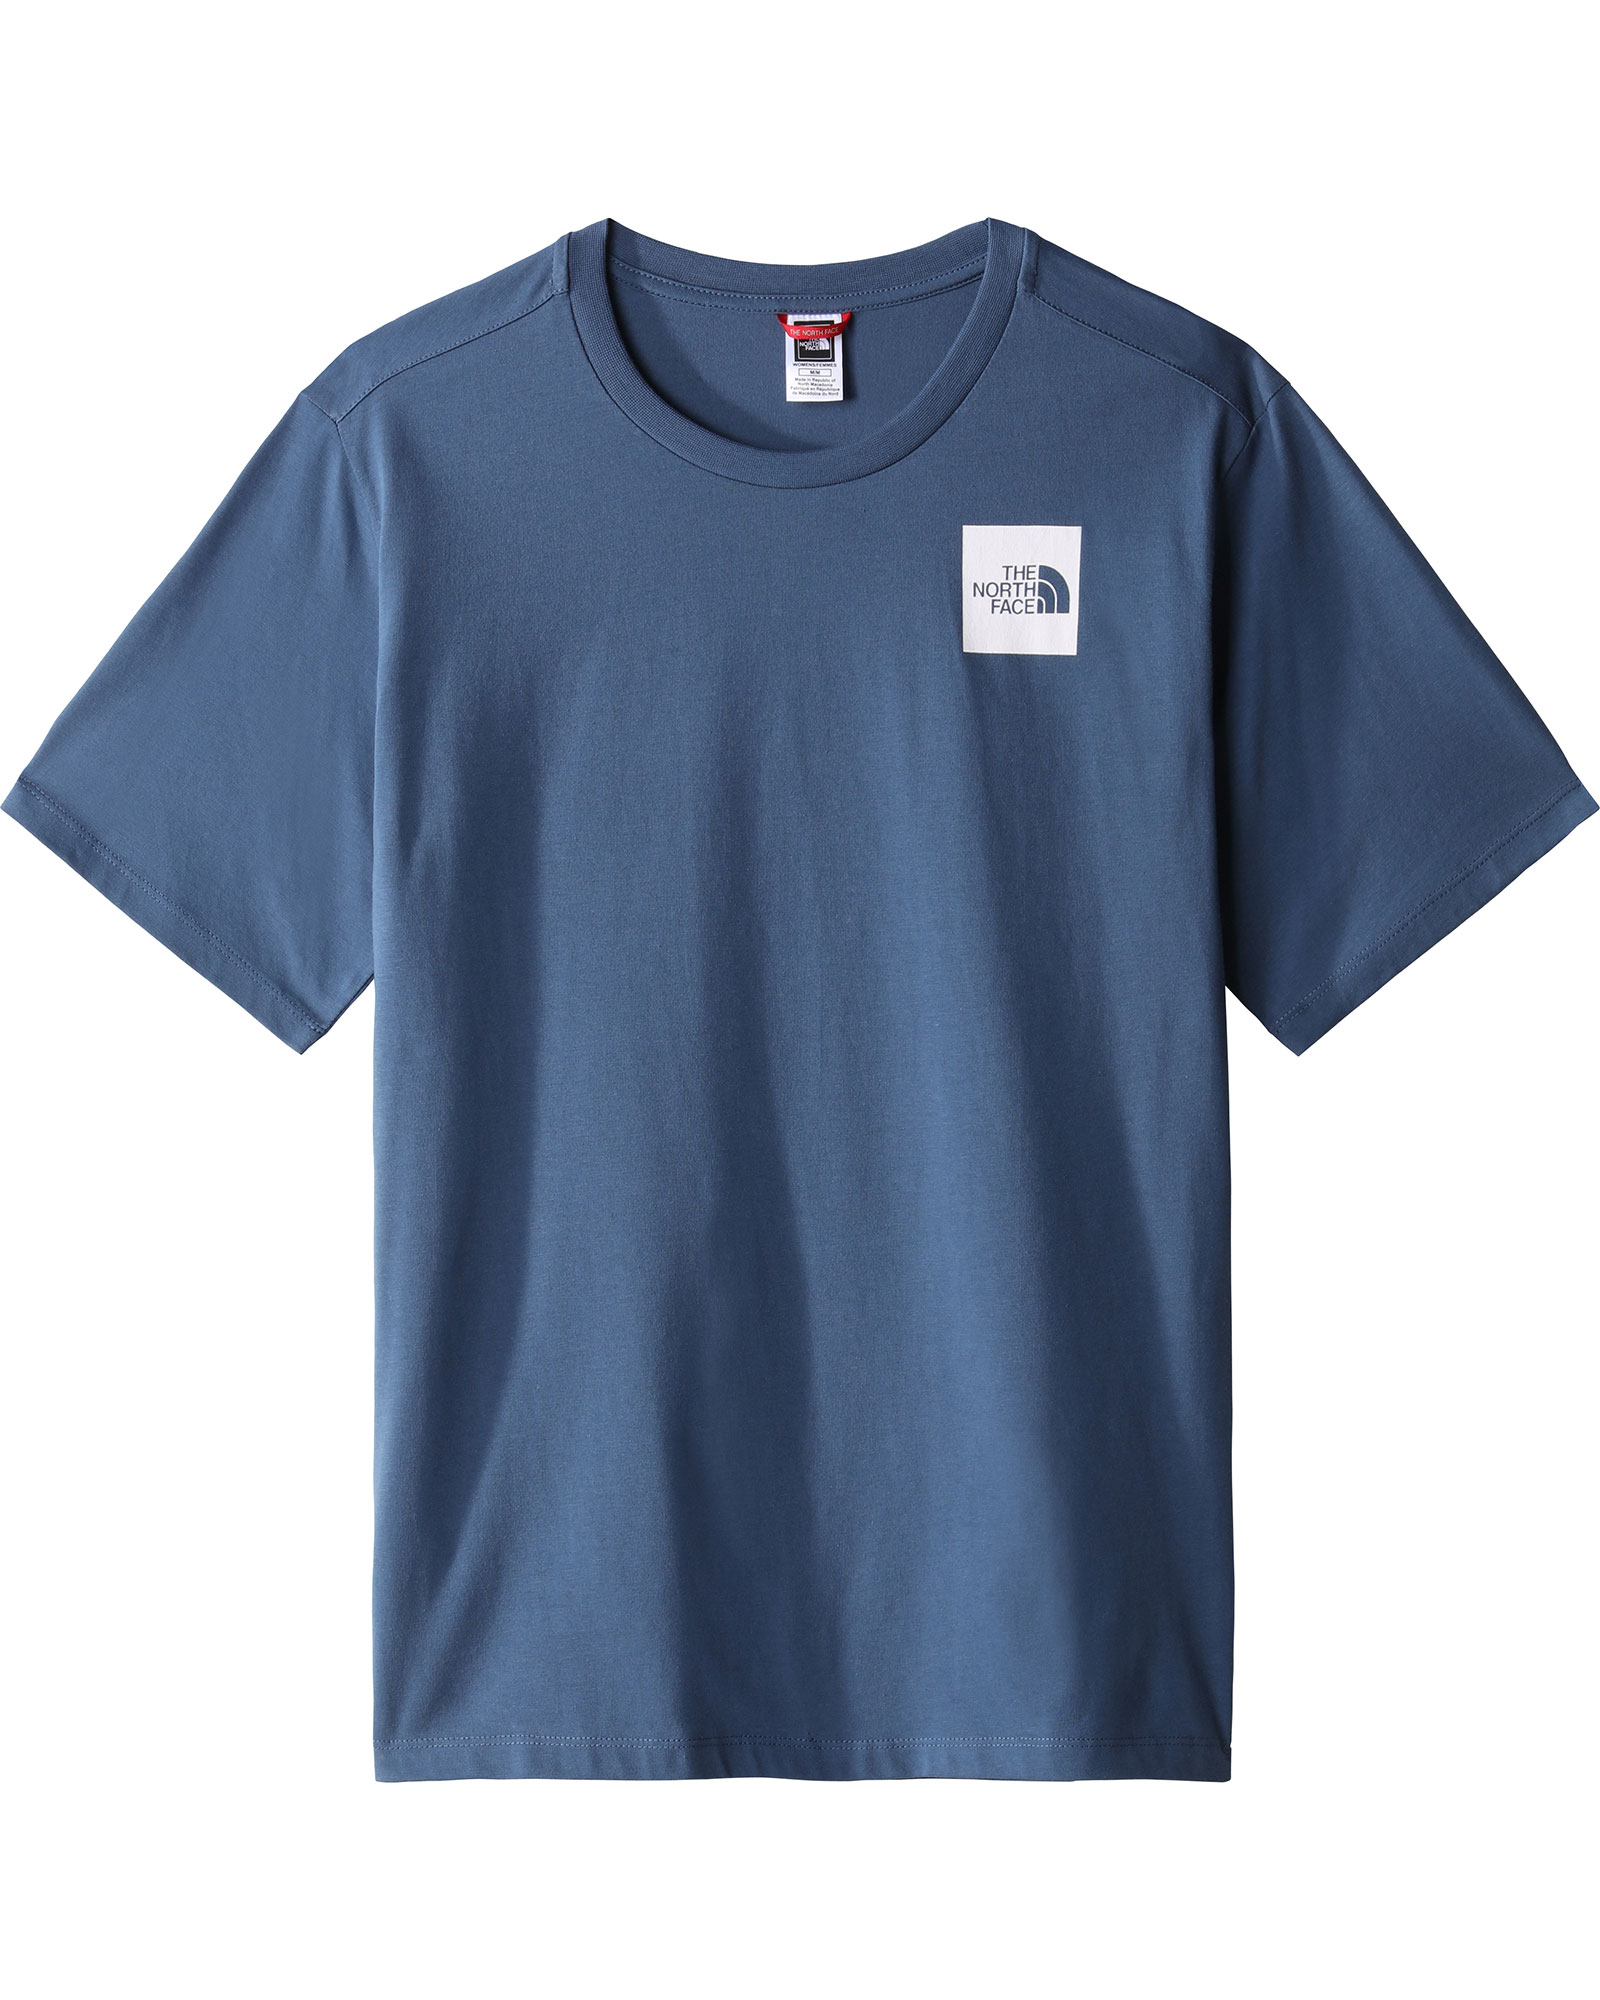 The North Face Women’s Relaxed Fine T Shirt - Shady Blue XS